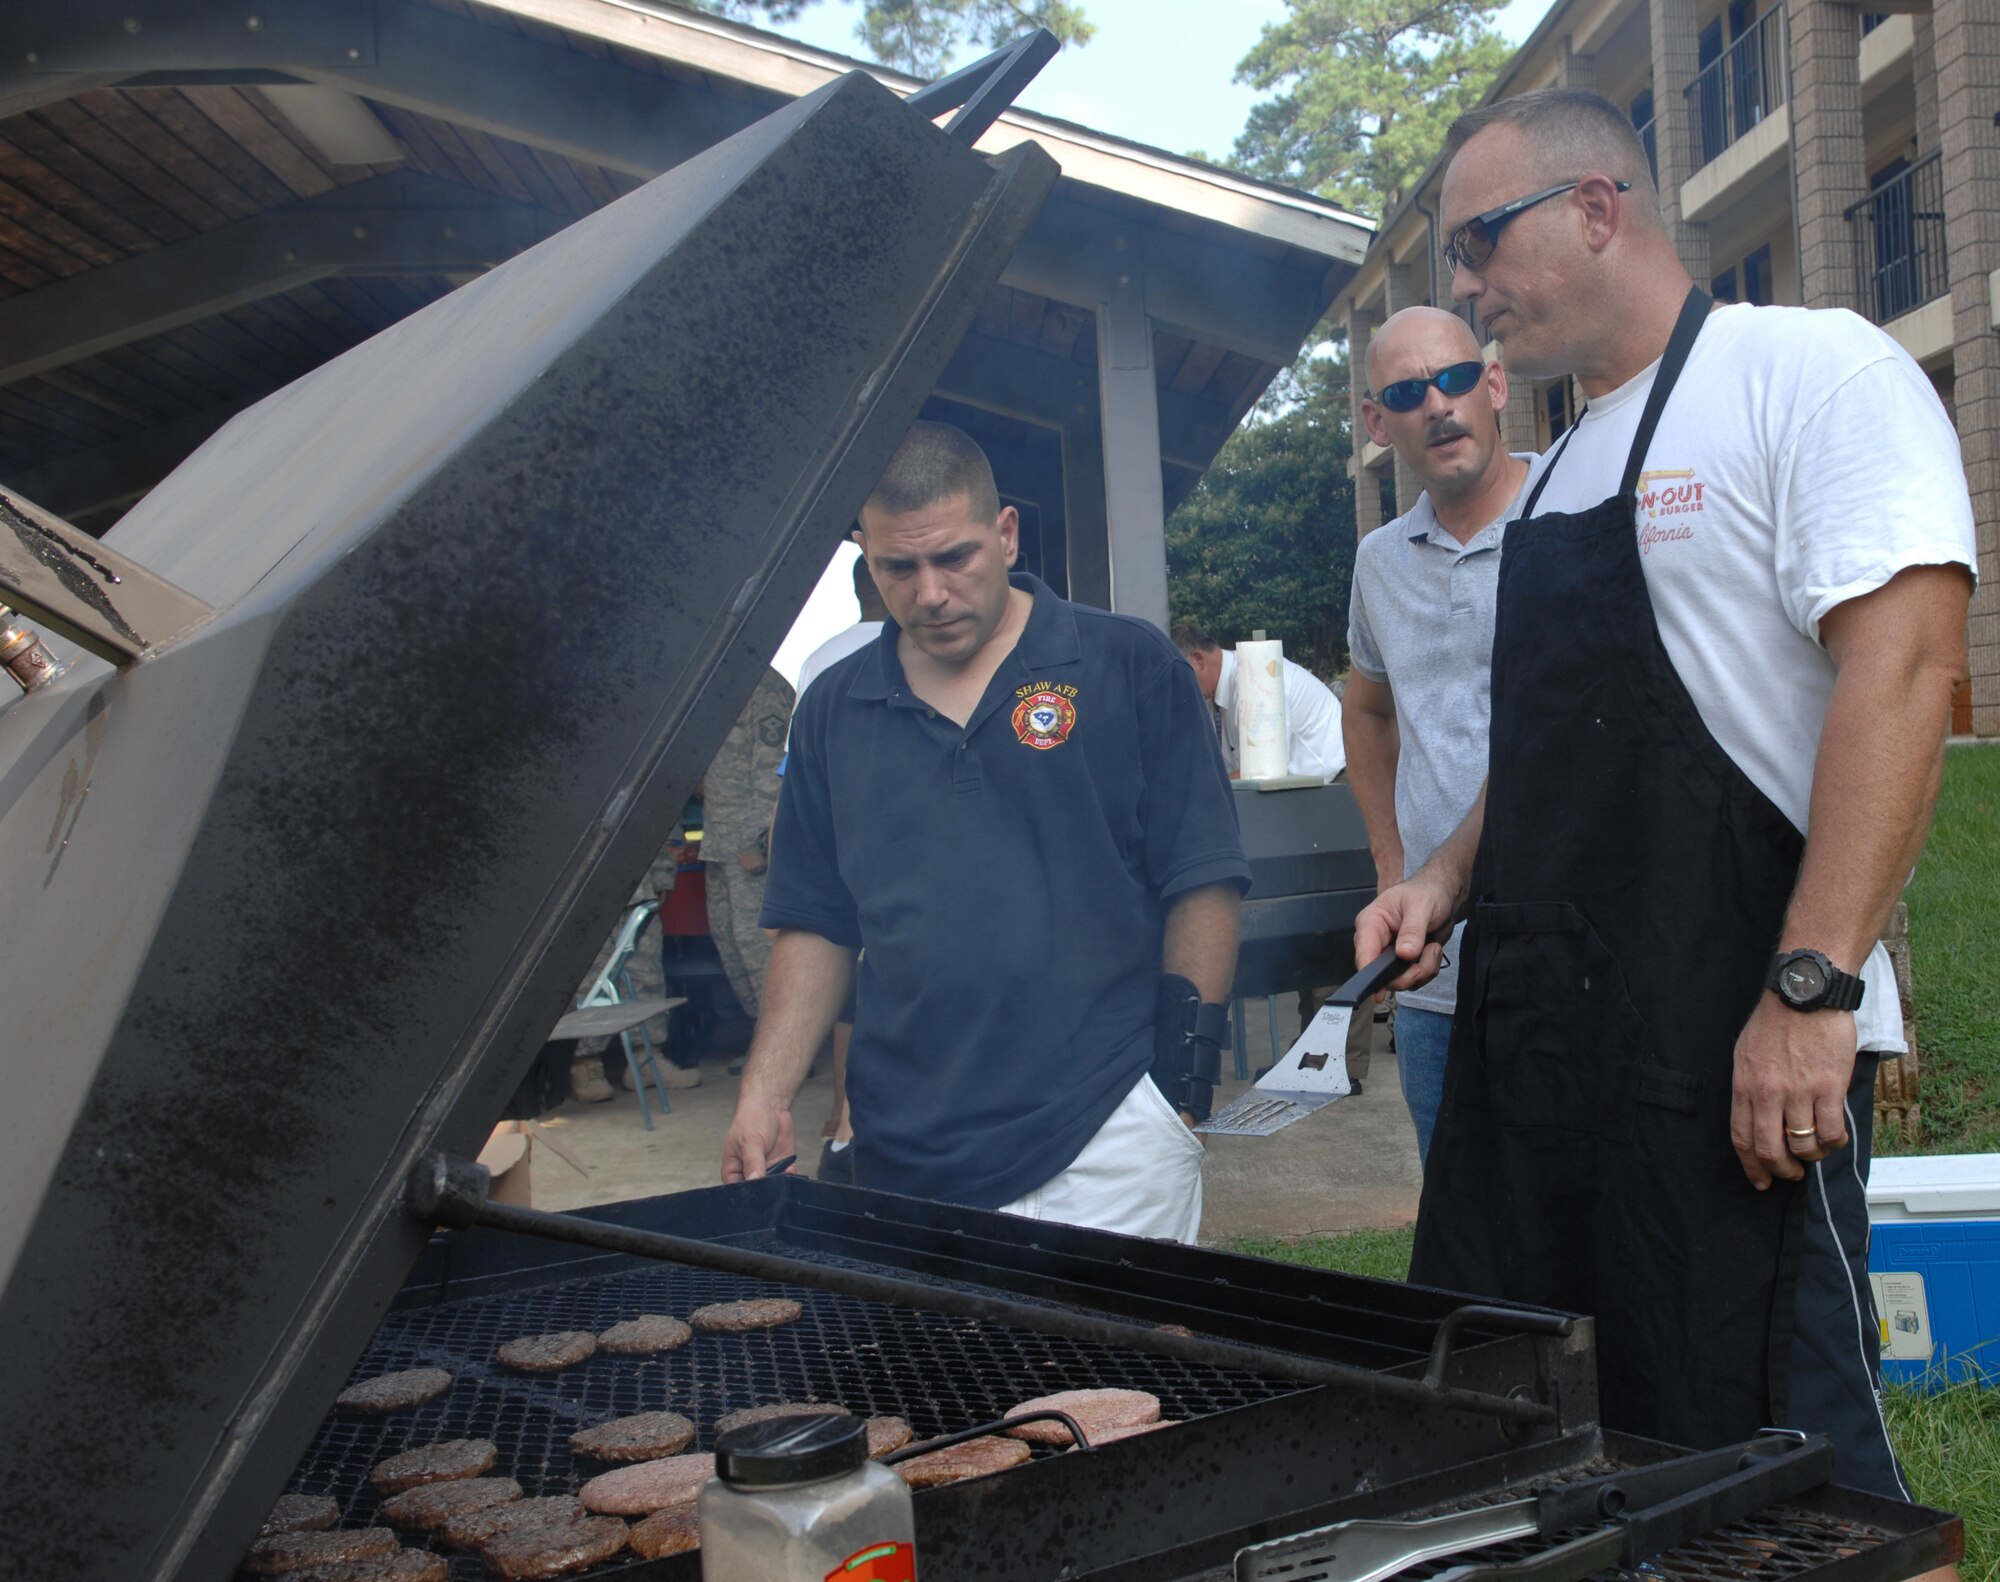 (From left to right) Senior Master Sgt. Matthew Clegg, 20th Civil Engineering Squadron deputy fire chief, Senior Master Sgt. Jerry Dire, 20th Communications Squadron systems superintendent, and Master Sgt. Mike Jordan, U.S. Air Forces Central A2 division non-commissioned officer in charge, grill burgers for the dorm dinner here, July 13, 2010. The dorm dinner is usually held the second Tuesday of each month. (U.S. Air Force photo/ Airman 1st Class Alexandria Mosness)